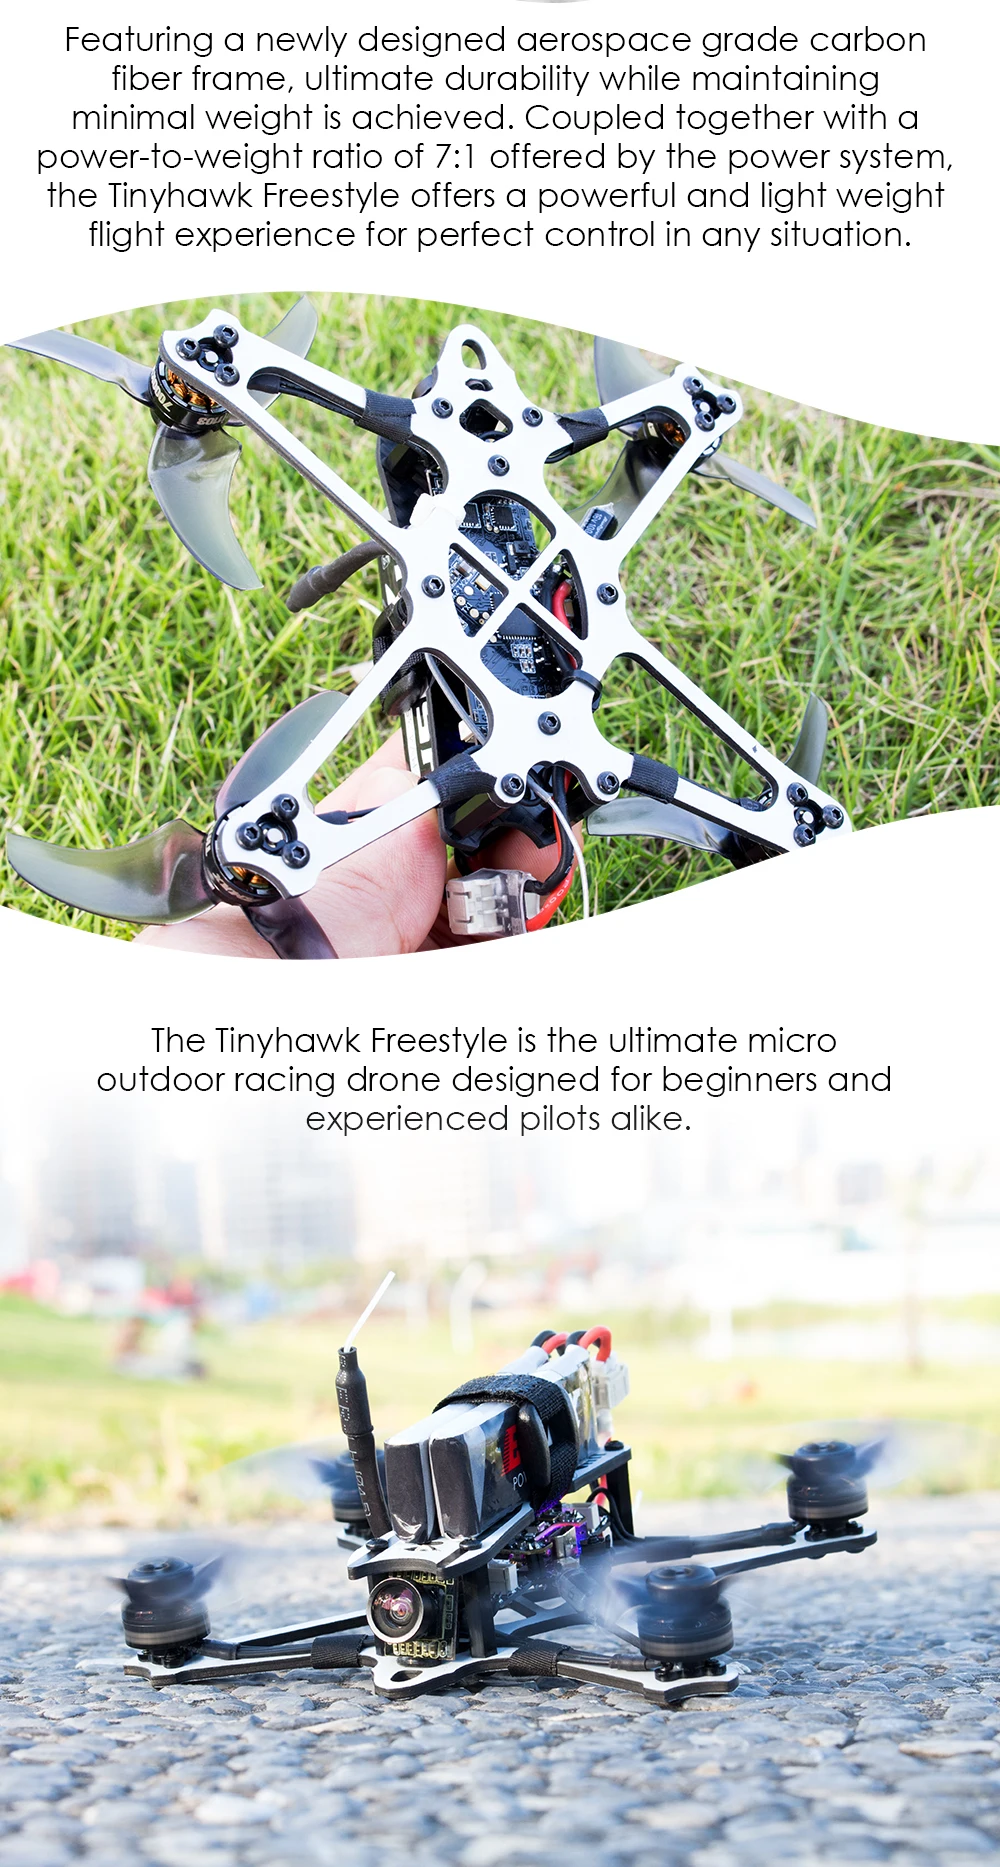 Tinyhawk Freestyle 115mm 2.5inch F4 5A ESC FPV Racing RC Drone BNF Version Frsky Compatible FPV Drone